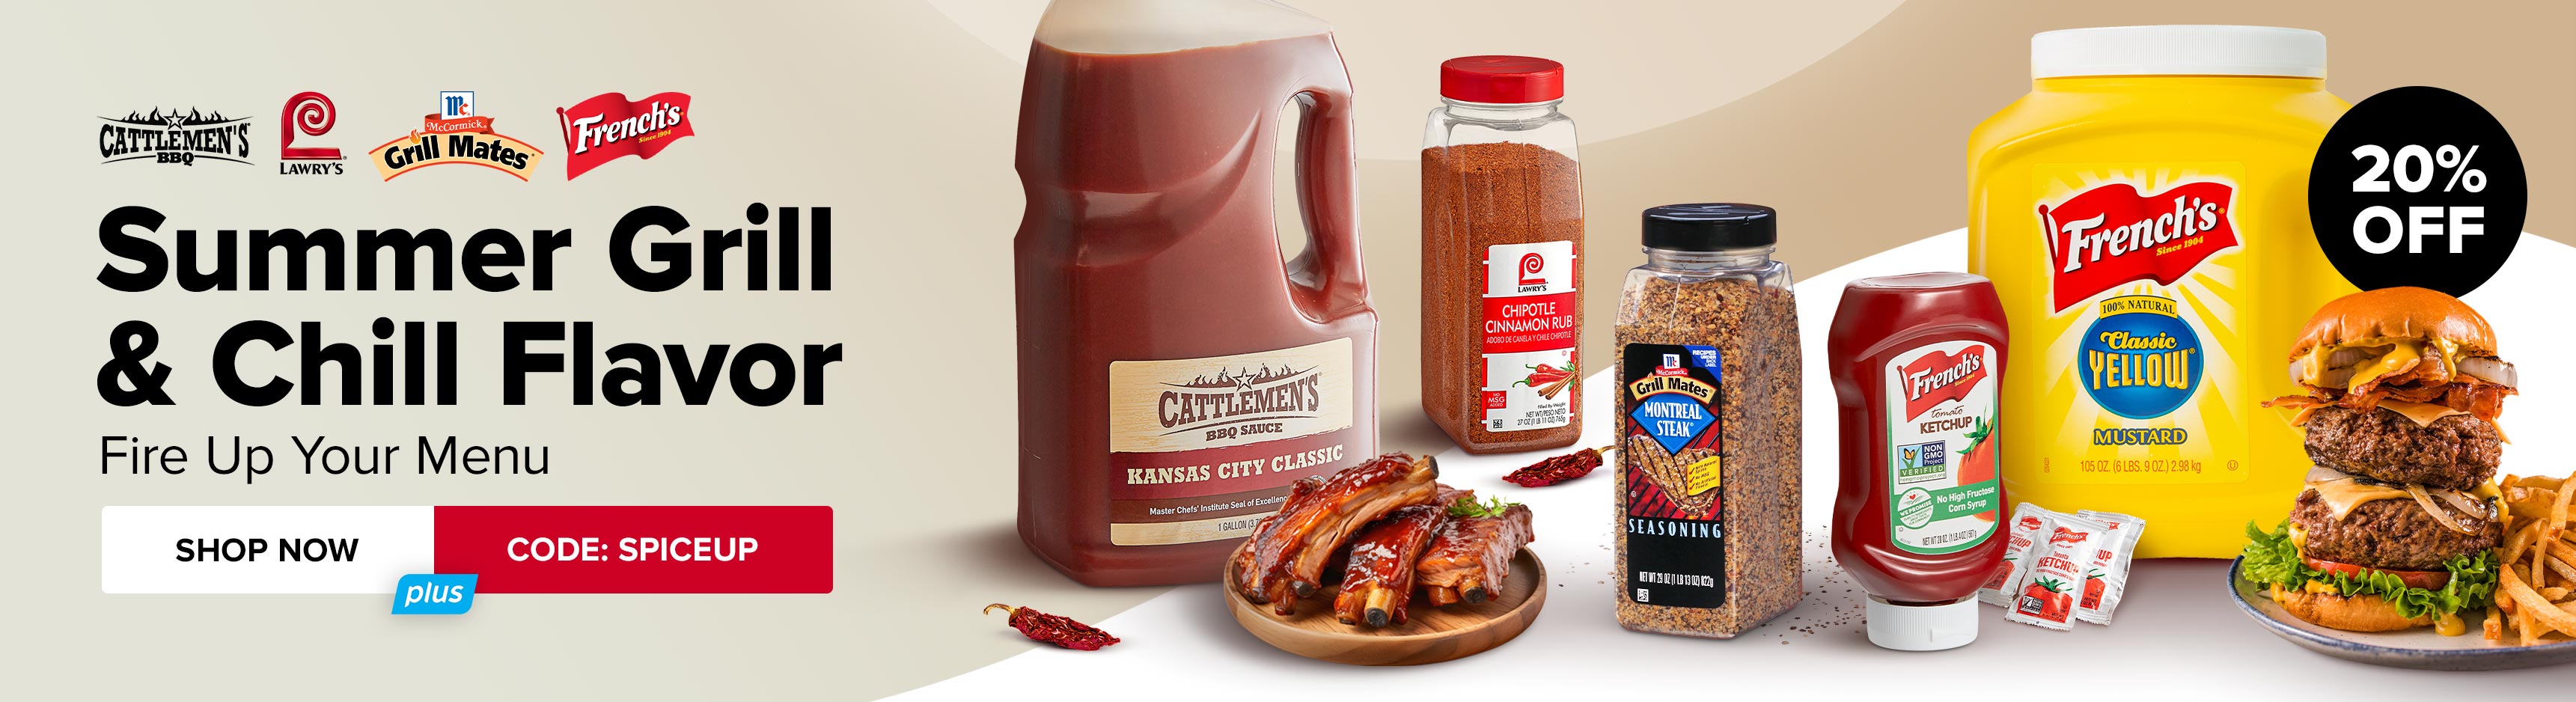 Save 20% on Summer Grill and Chill Flavors with Condiments, Sauces, Rubs, Seasonings and More